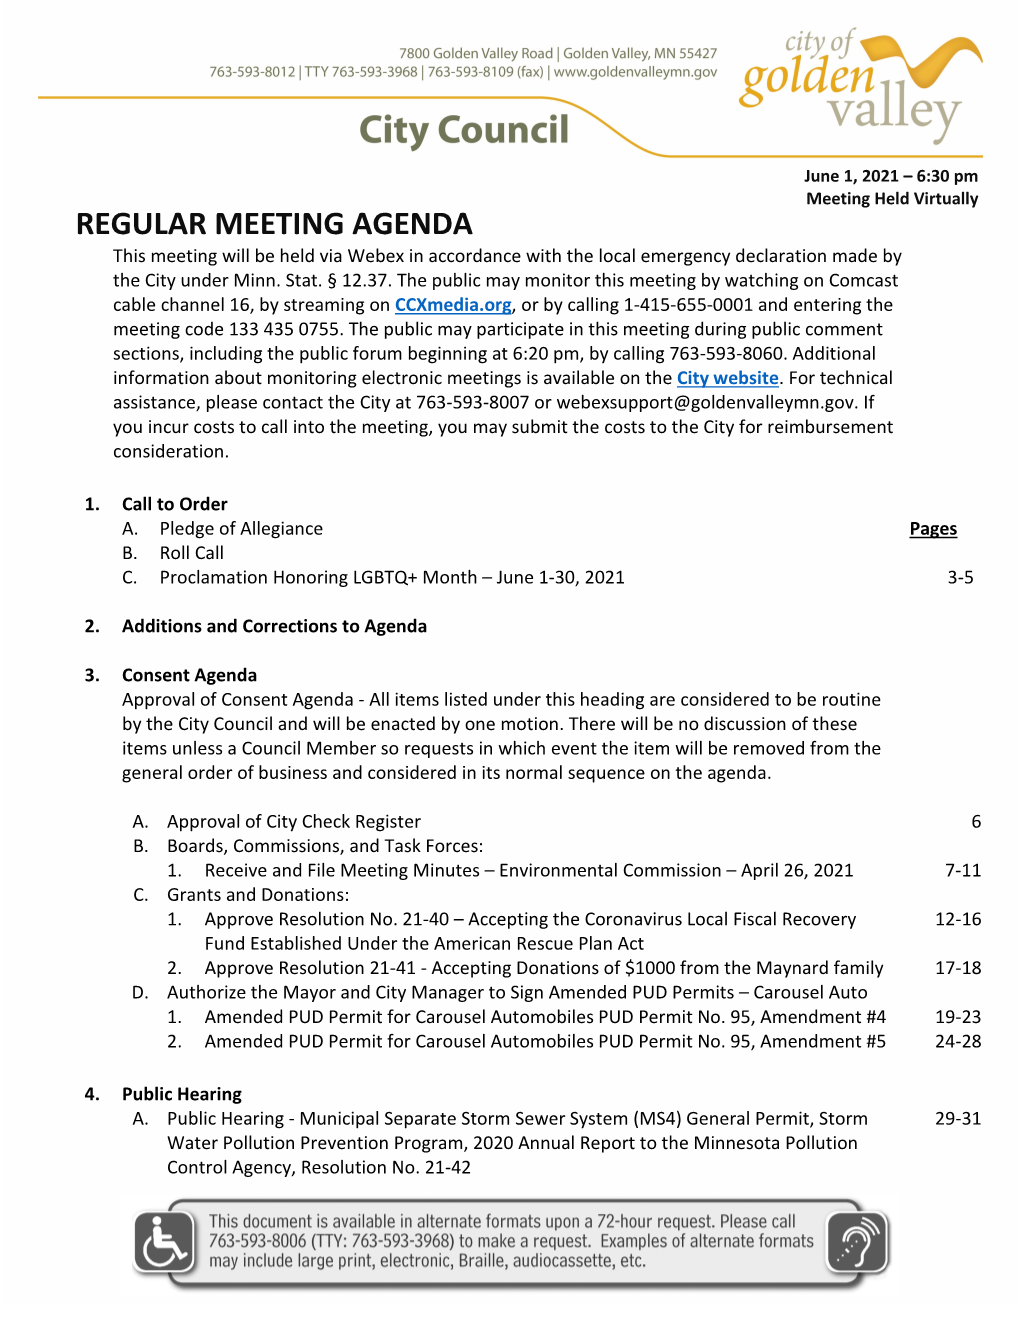 REGULAR MEETING AGENDA This Meeting Will Be Held Via Webex in Accordance with the Local Emergency Declaration Made by the City Under Minn